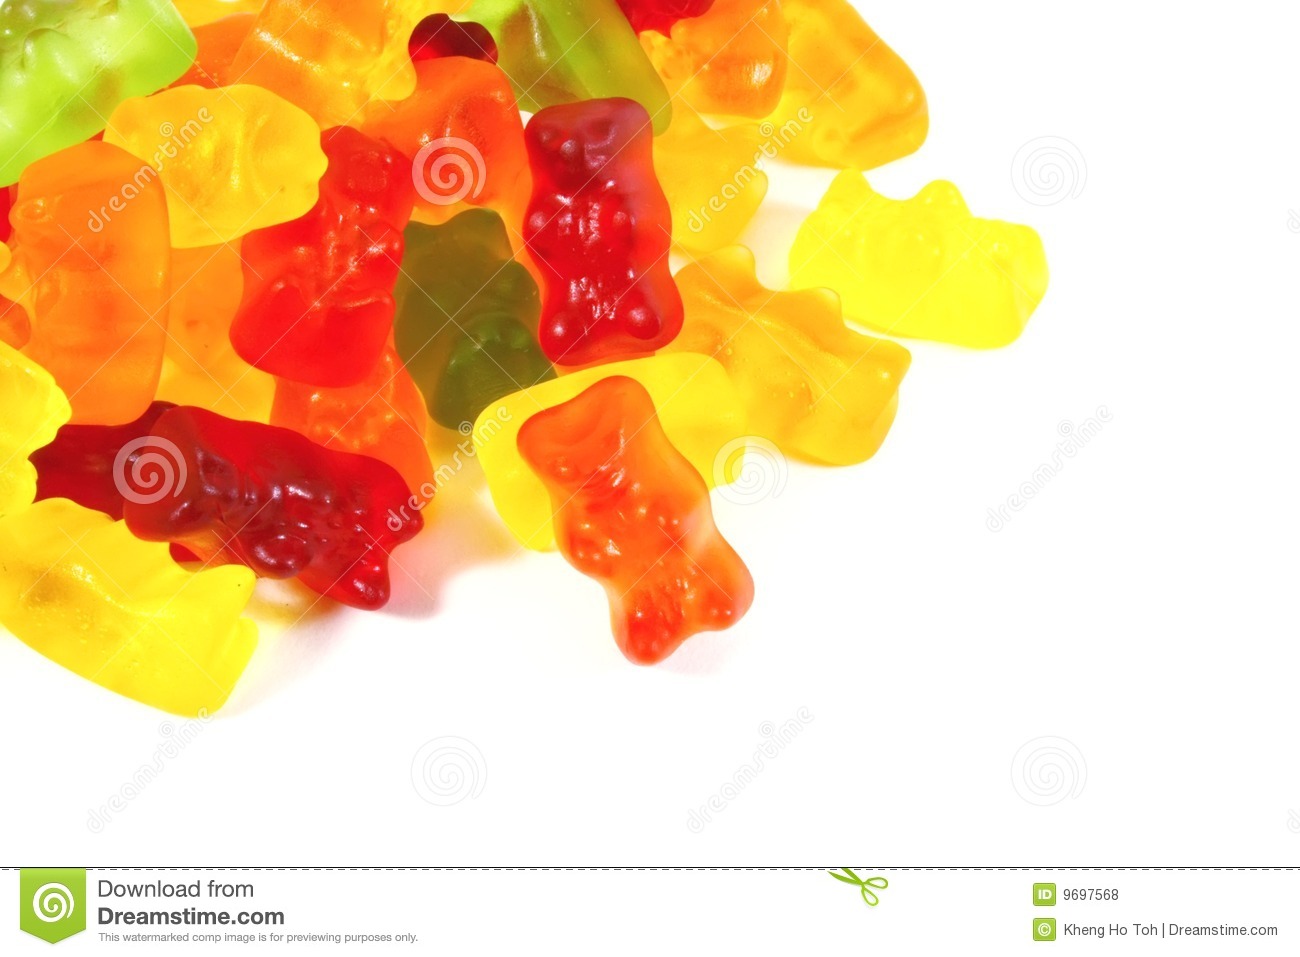 Gummi Bears The Ultimate Candy Snack For Kids And Children